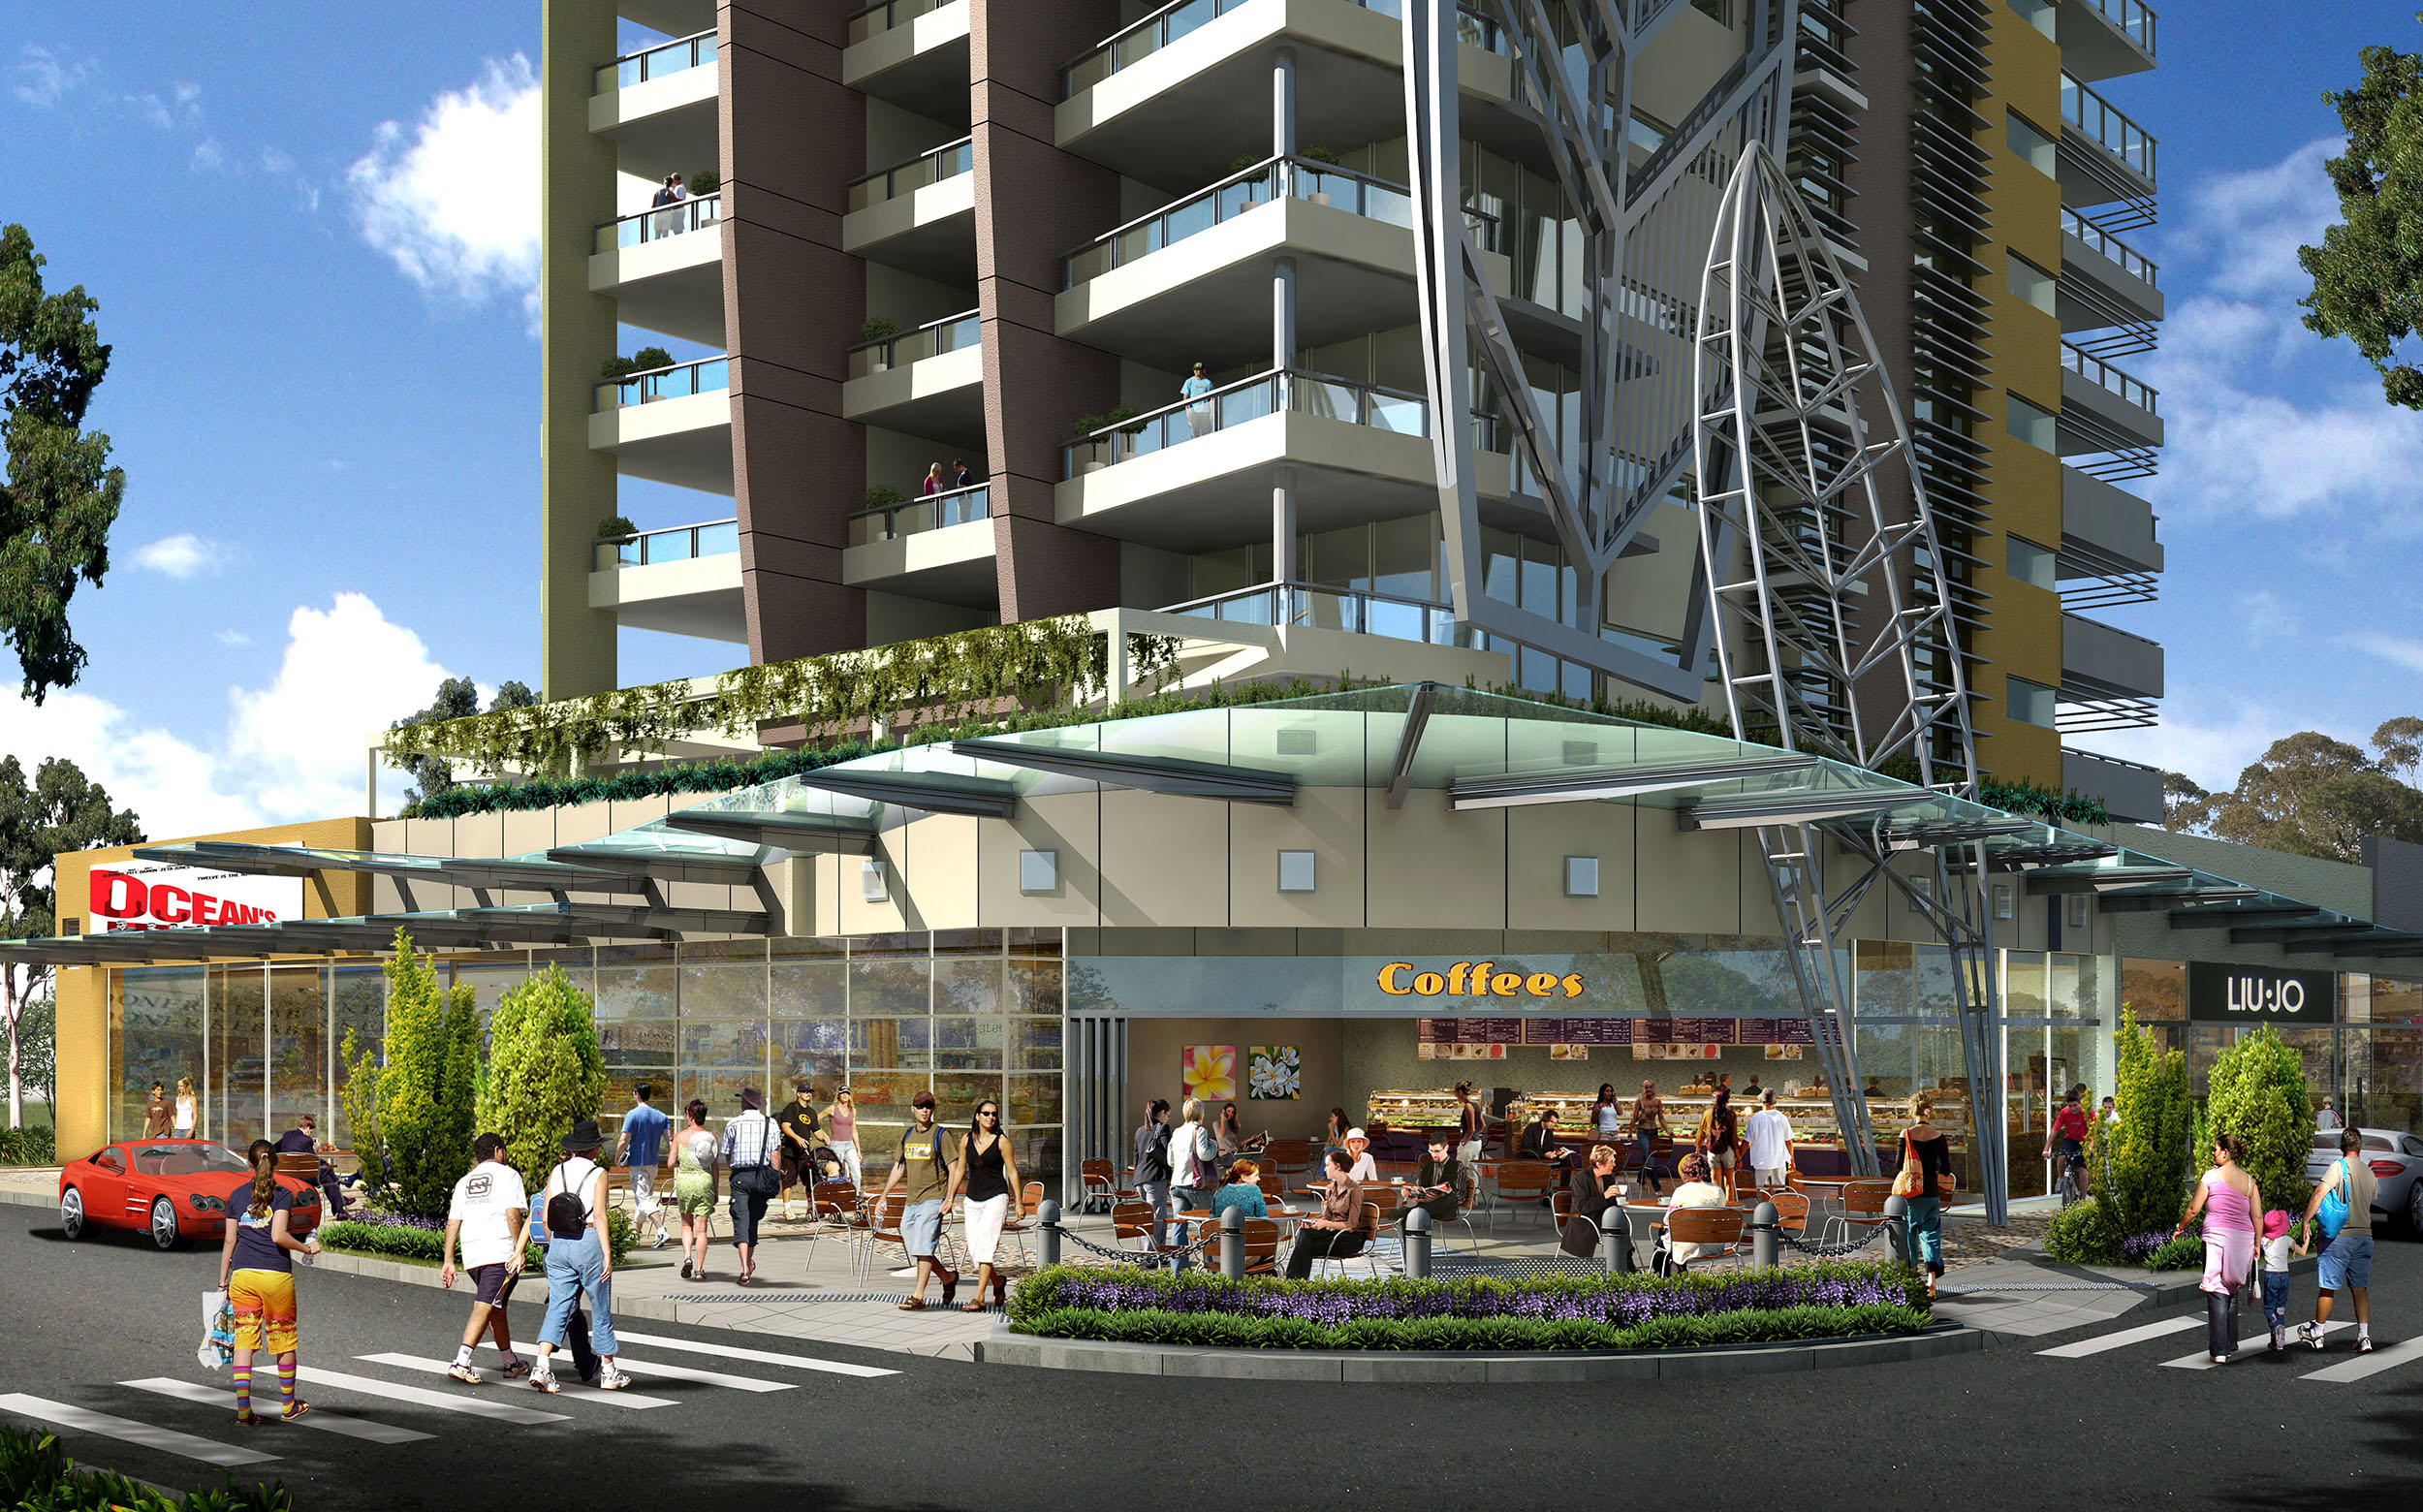 View of the ground level of a mid-rise mixed-use apartment building, showcasing a vibrant commercial tenancy occupied by a coffee shop. People can be seen socializing and relaxing outside the coffee shop.